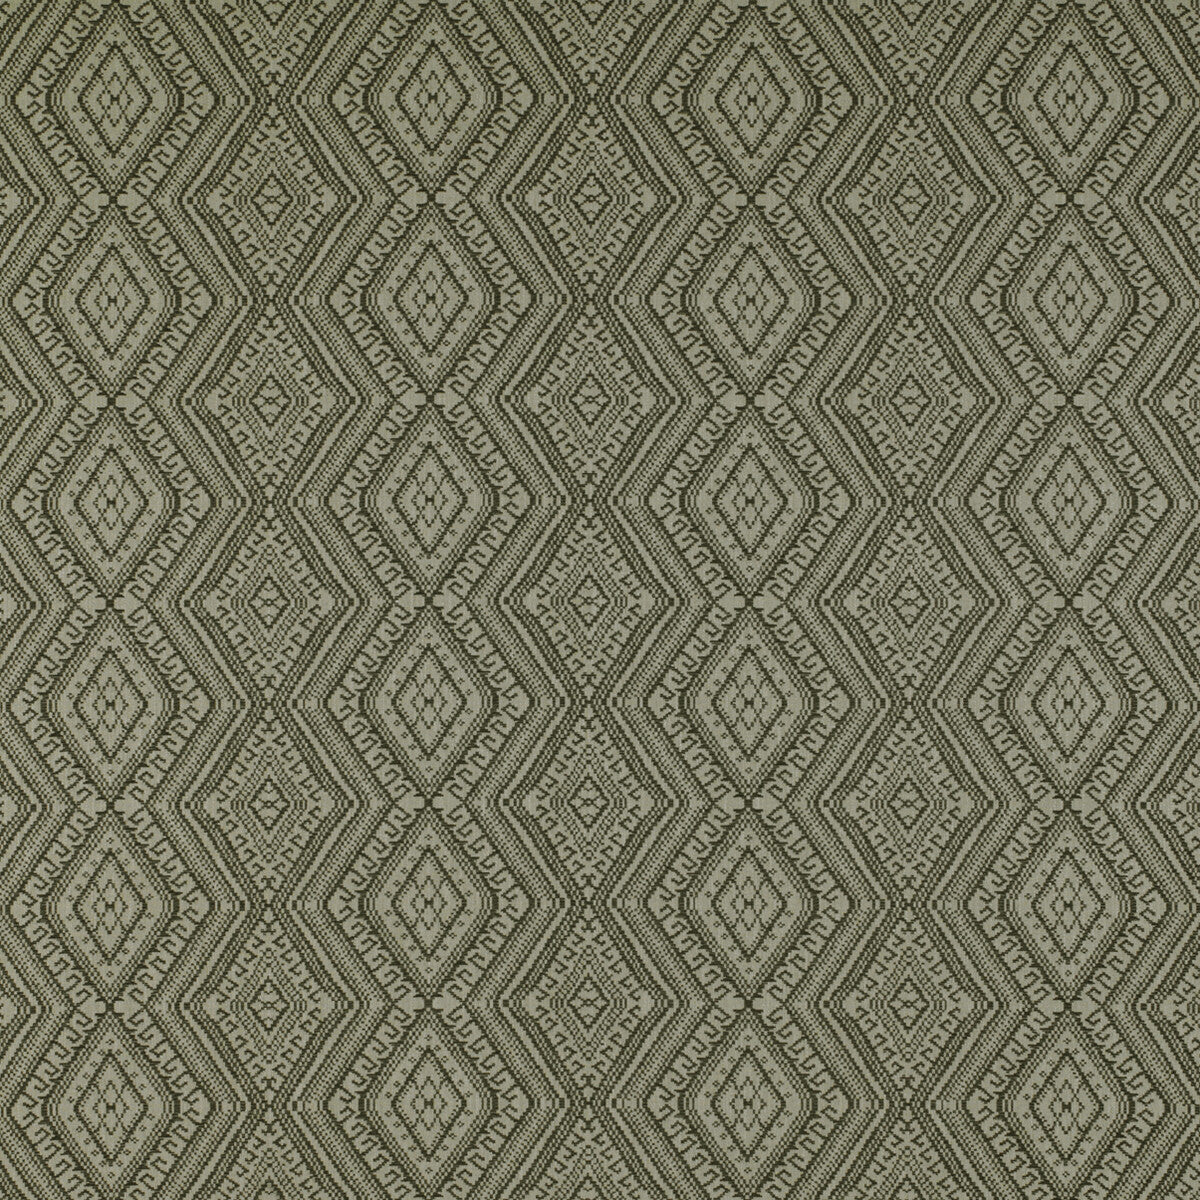 Milan fabric in onyx color - pattern GDT5326.001.0 - by Gaston y Daniela in the Tierras collection